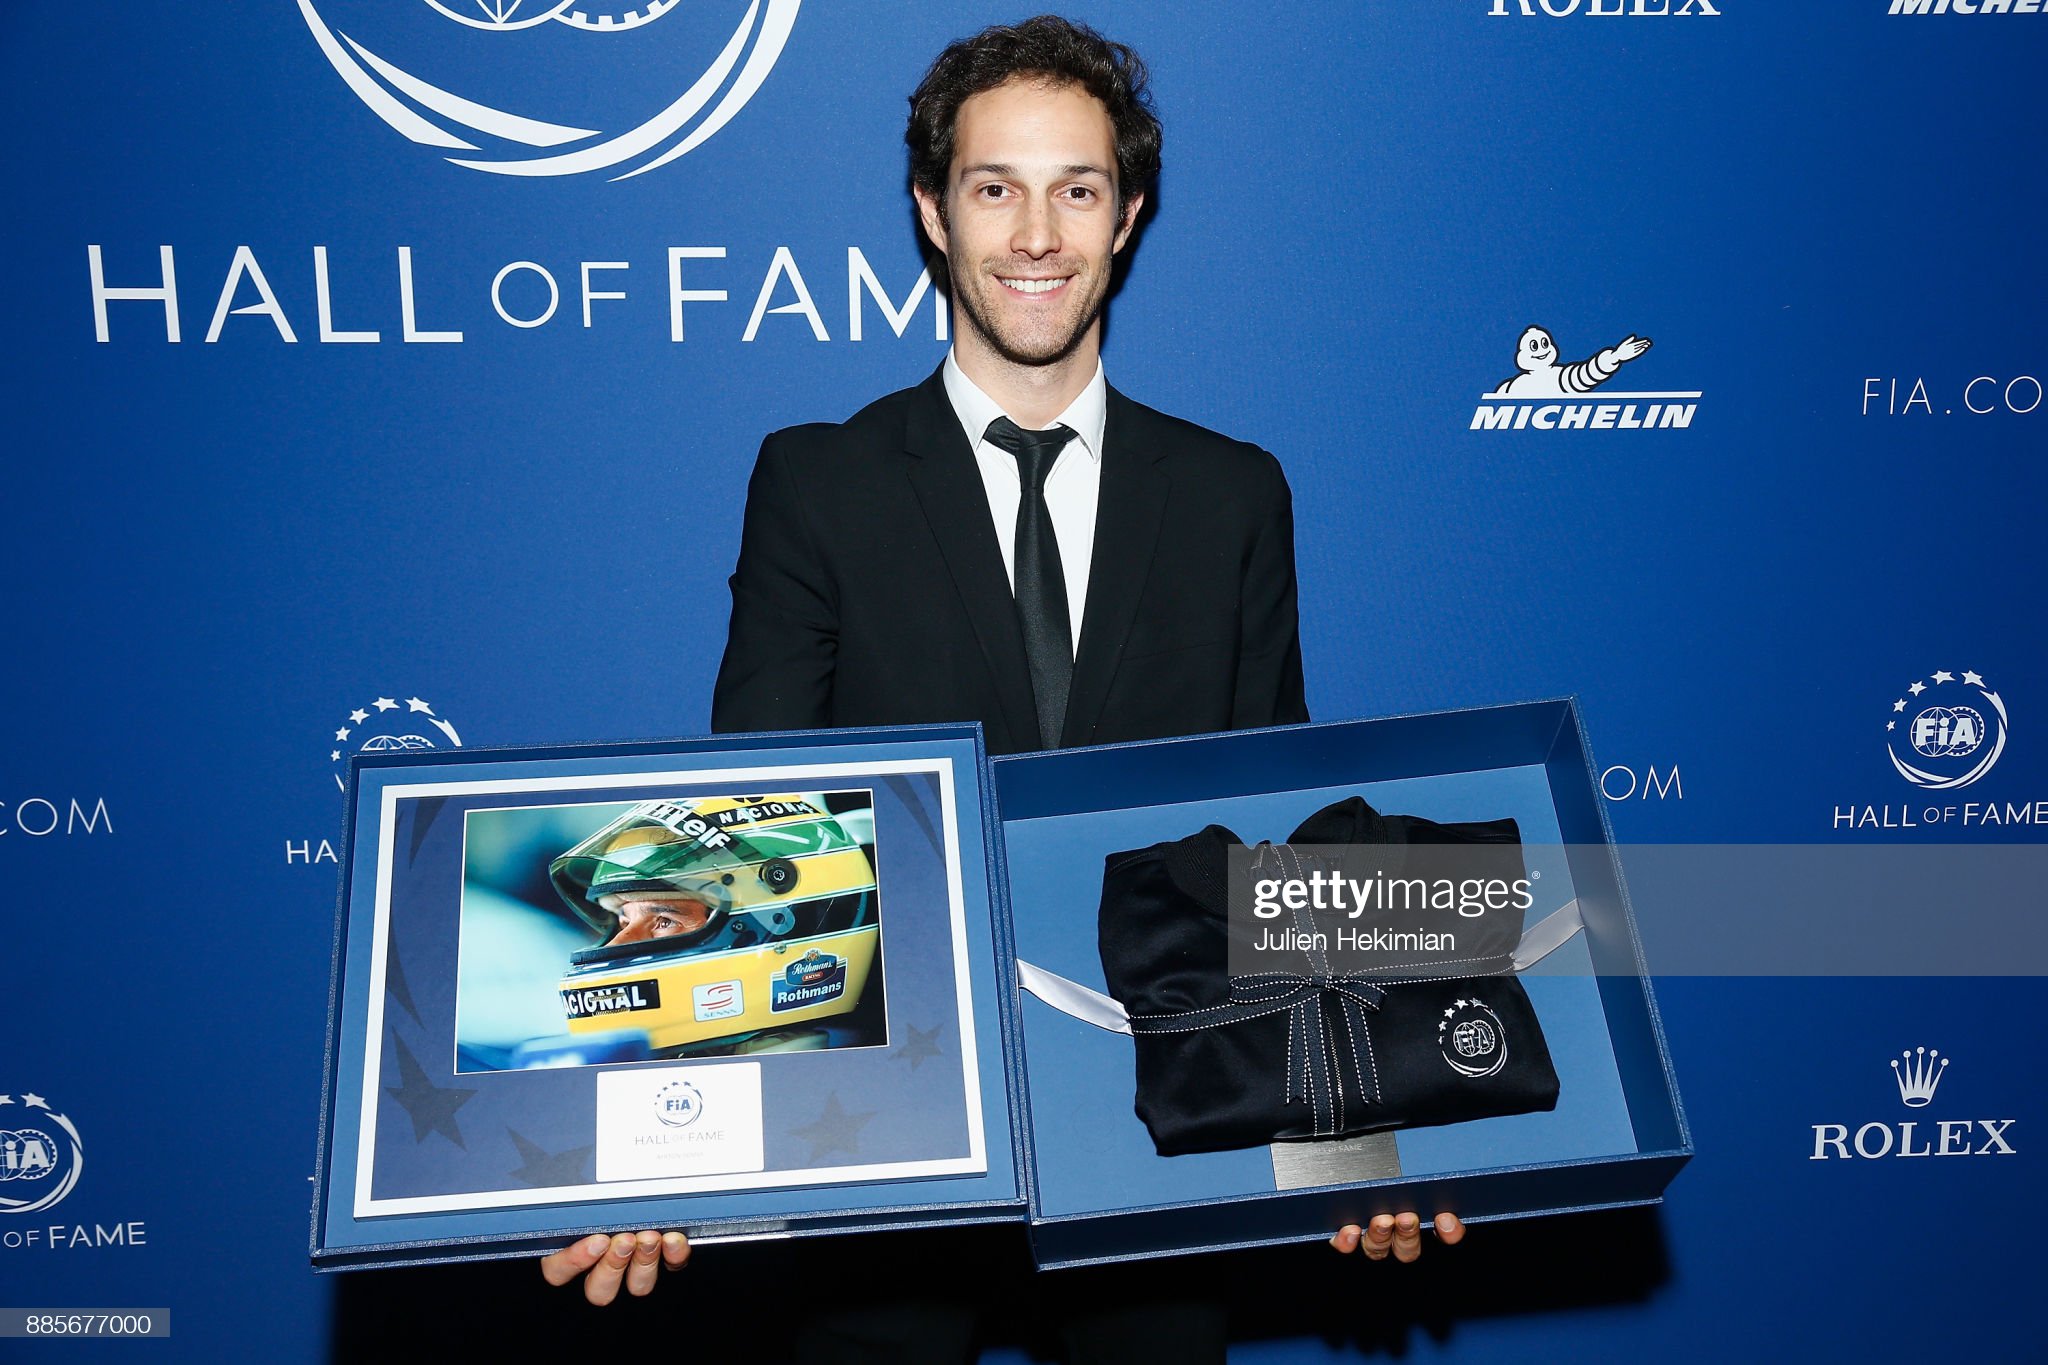 Bruno Senna is pictured after he received an award for his deceased uncle Ayrton Senna.